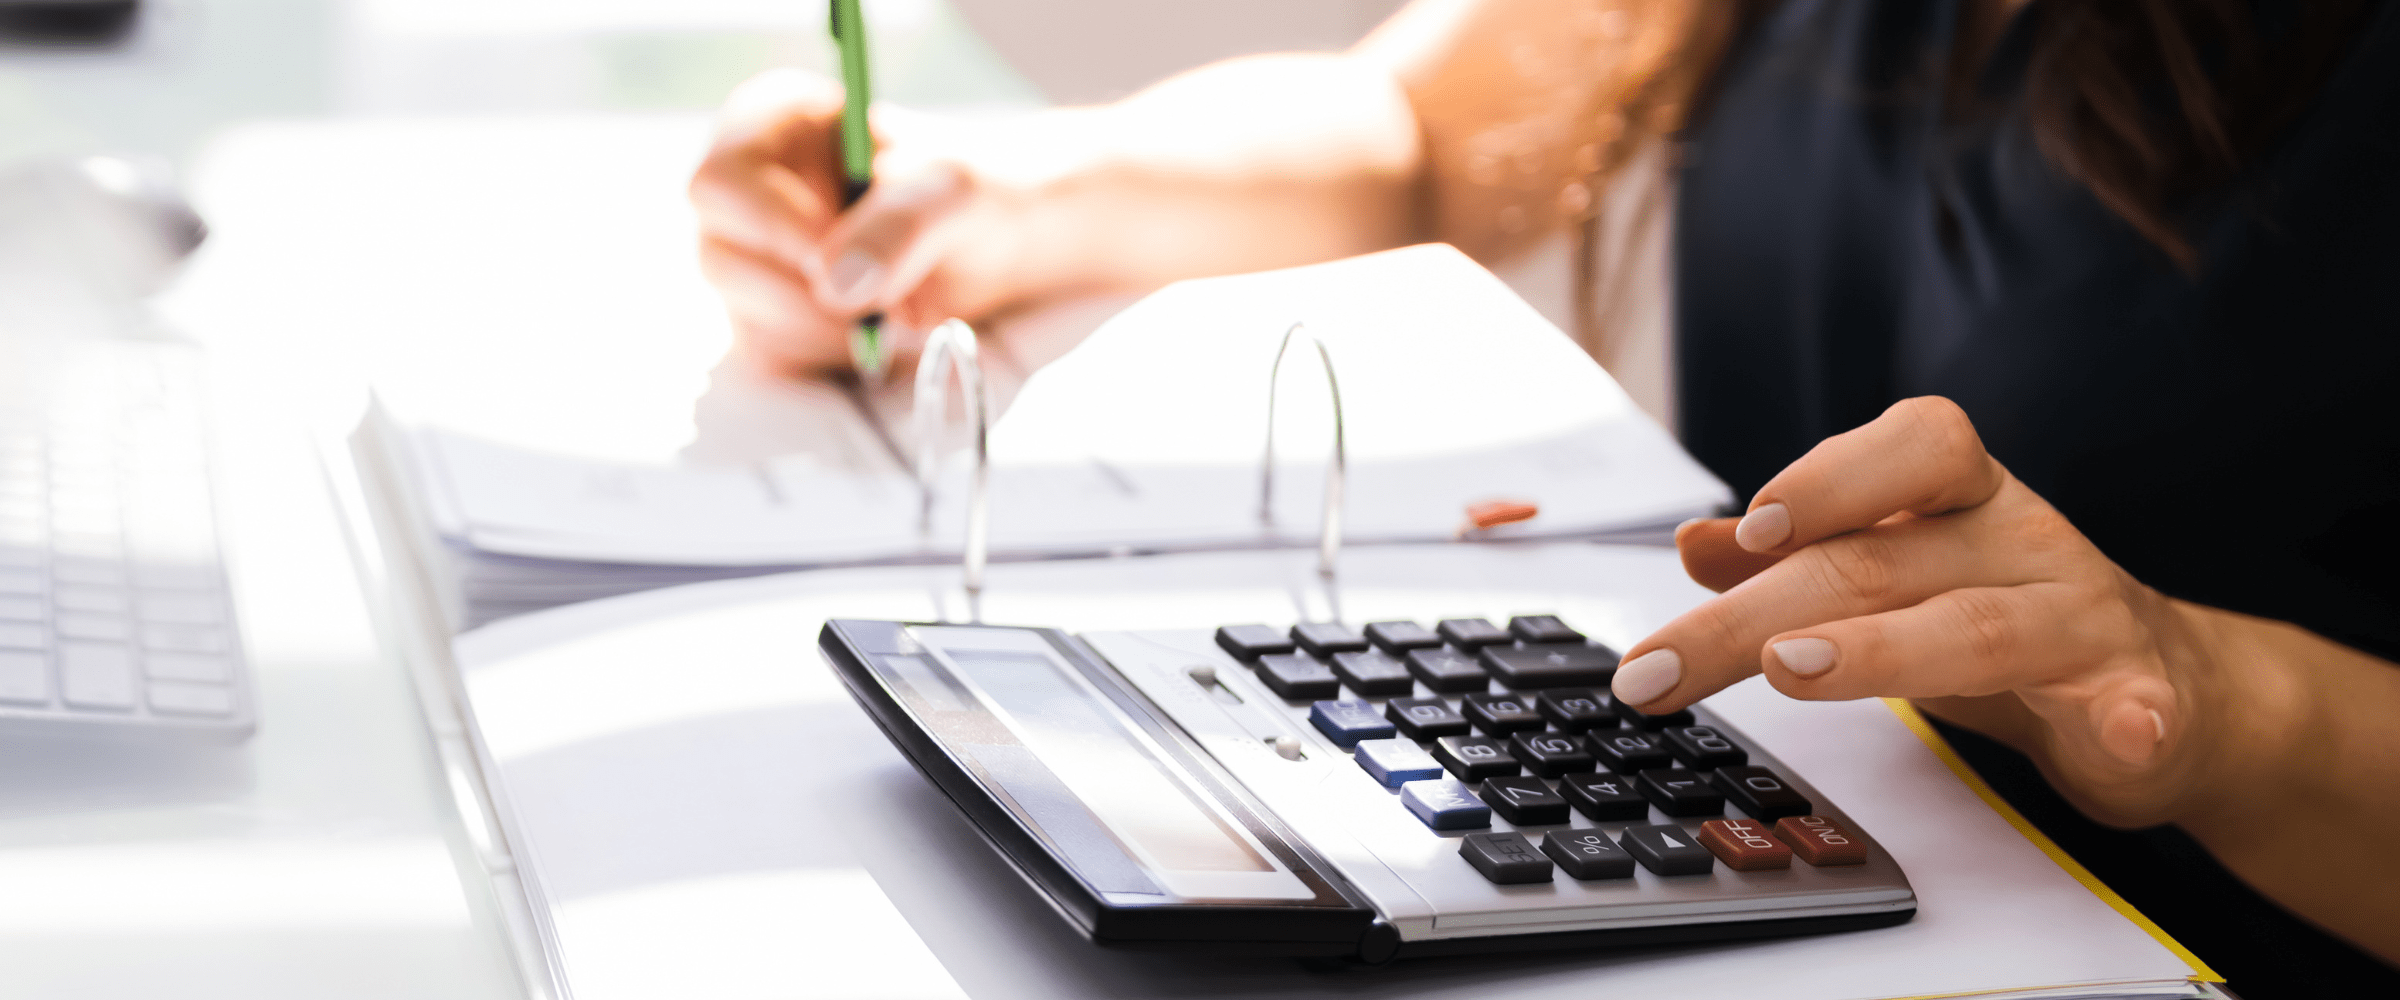 Common Mistakes to Avoid When Filing Income Tax Returns